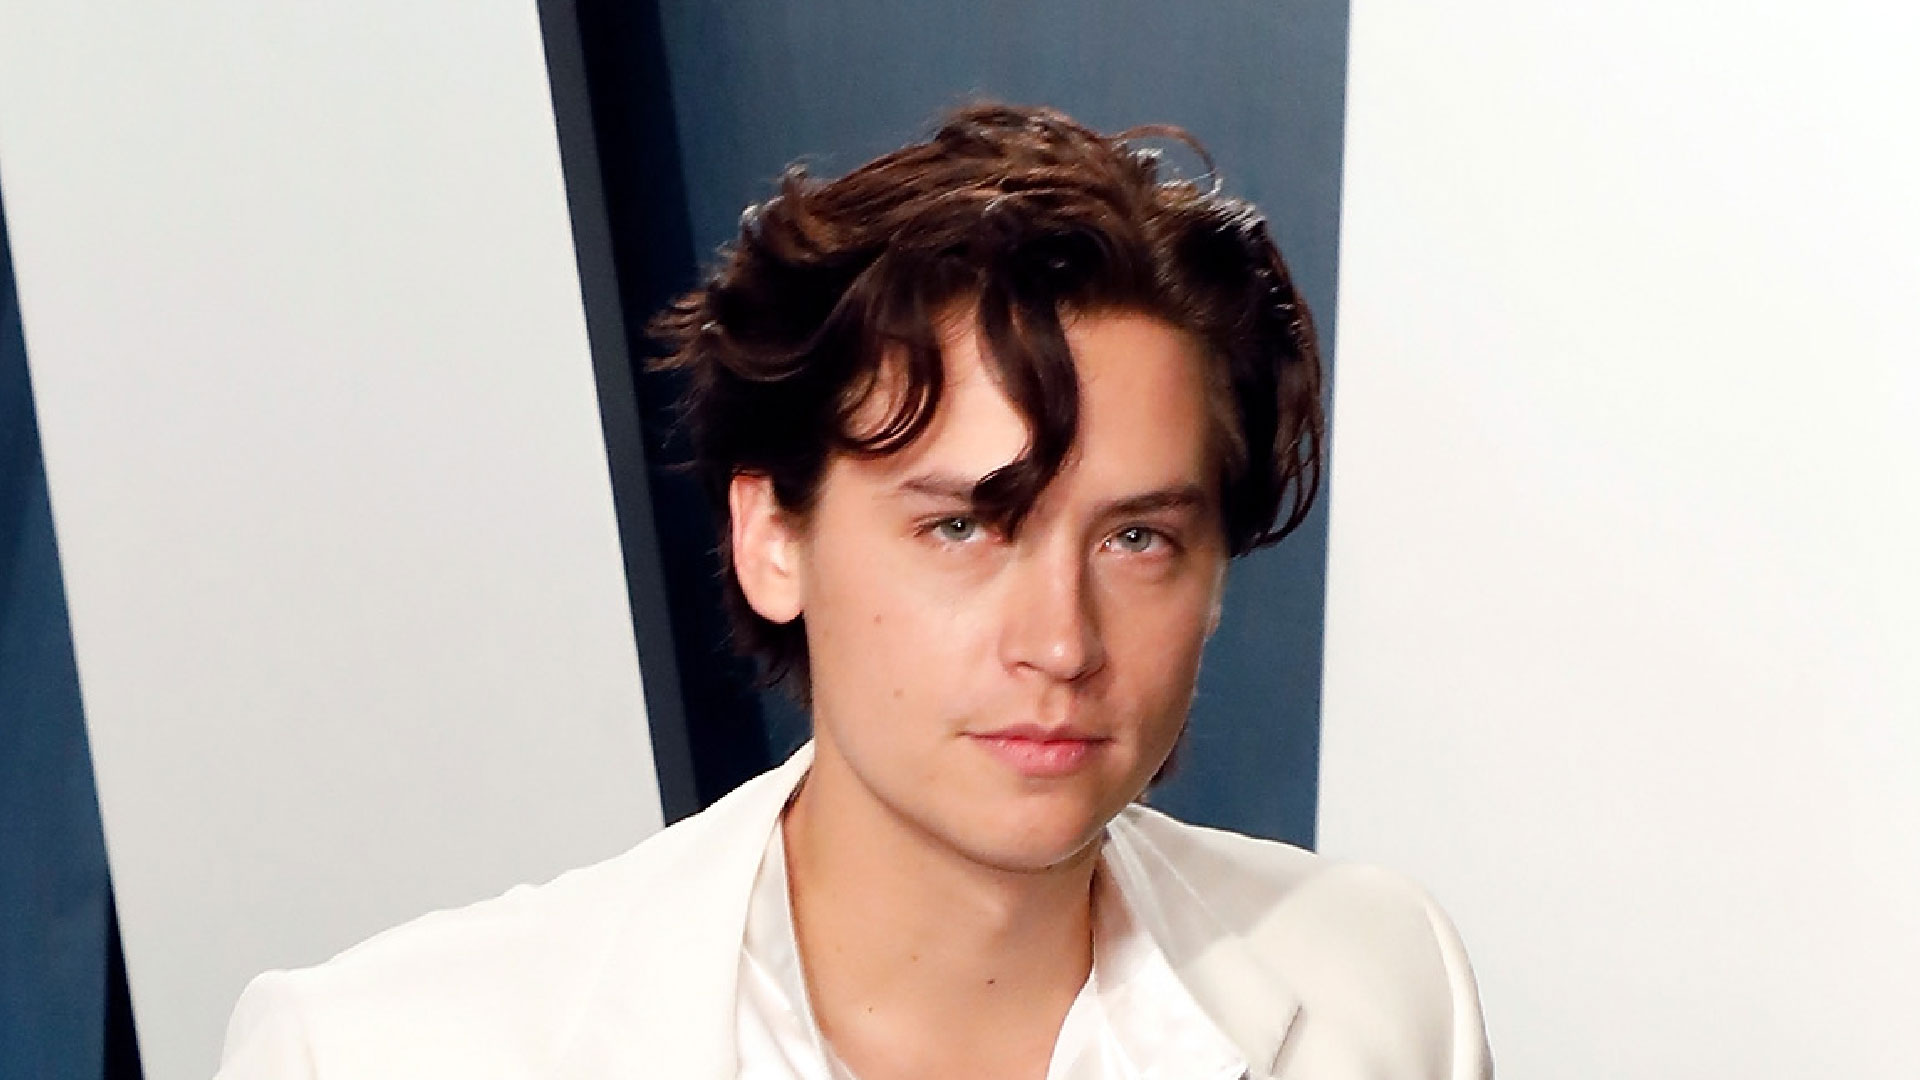 Cole Sprouse: Grown-Out Hairstyle With Side Parting